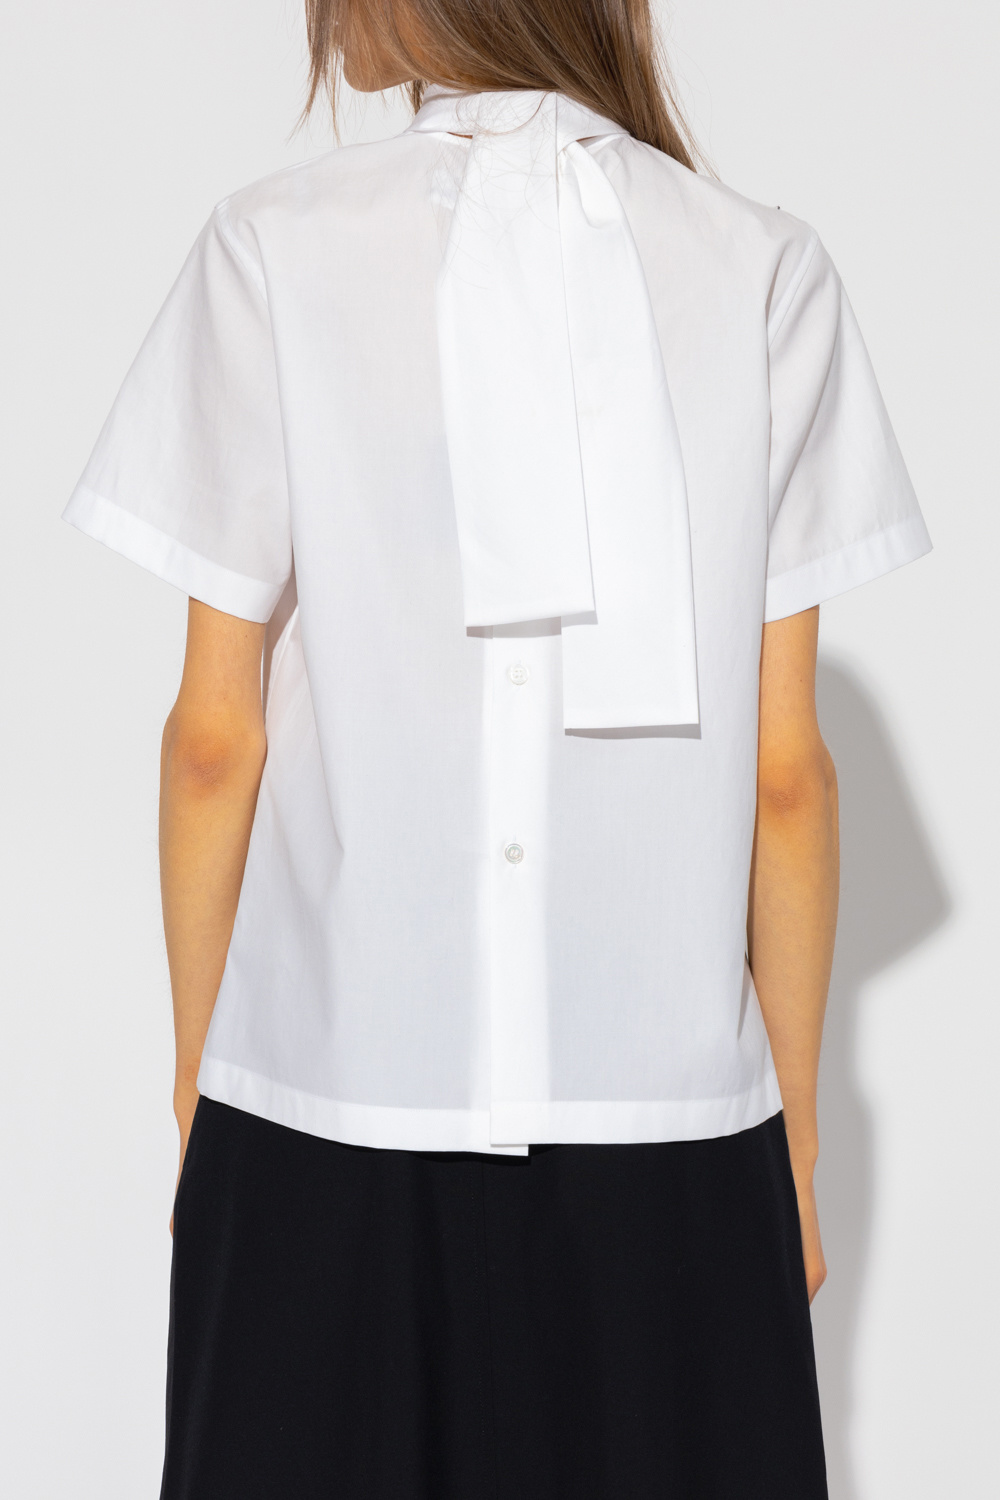 Tamiami™ II L S Shirt Cotton shirt with tie detail